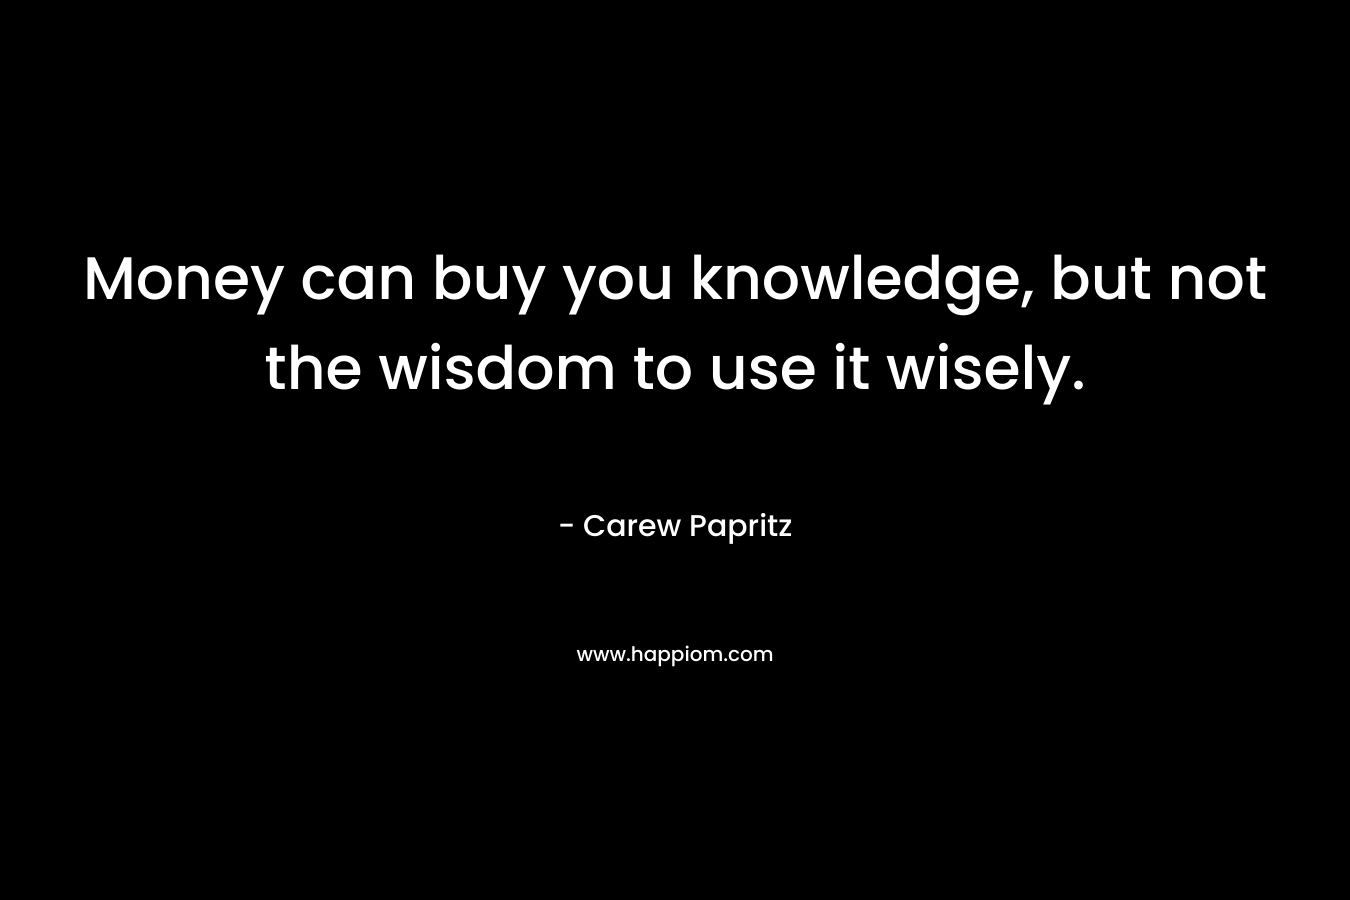 Money can buy you knowledge, but not the wisdom to use it wisely. – Carew Papritz